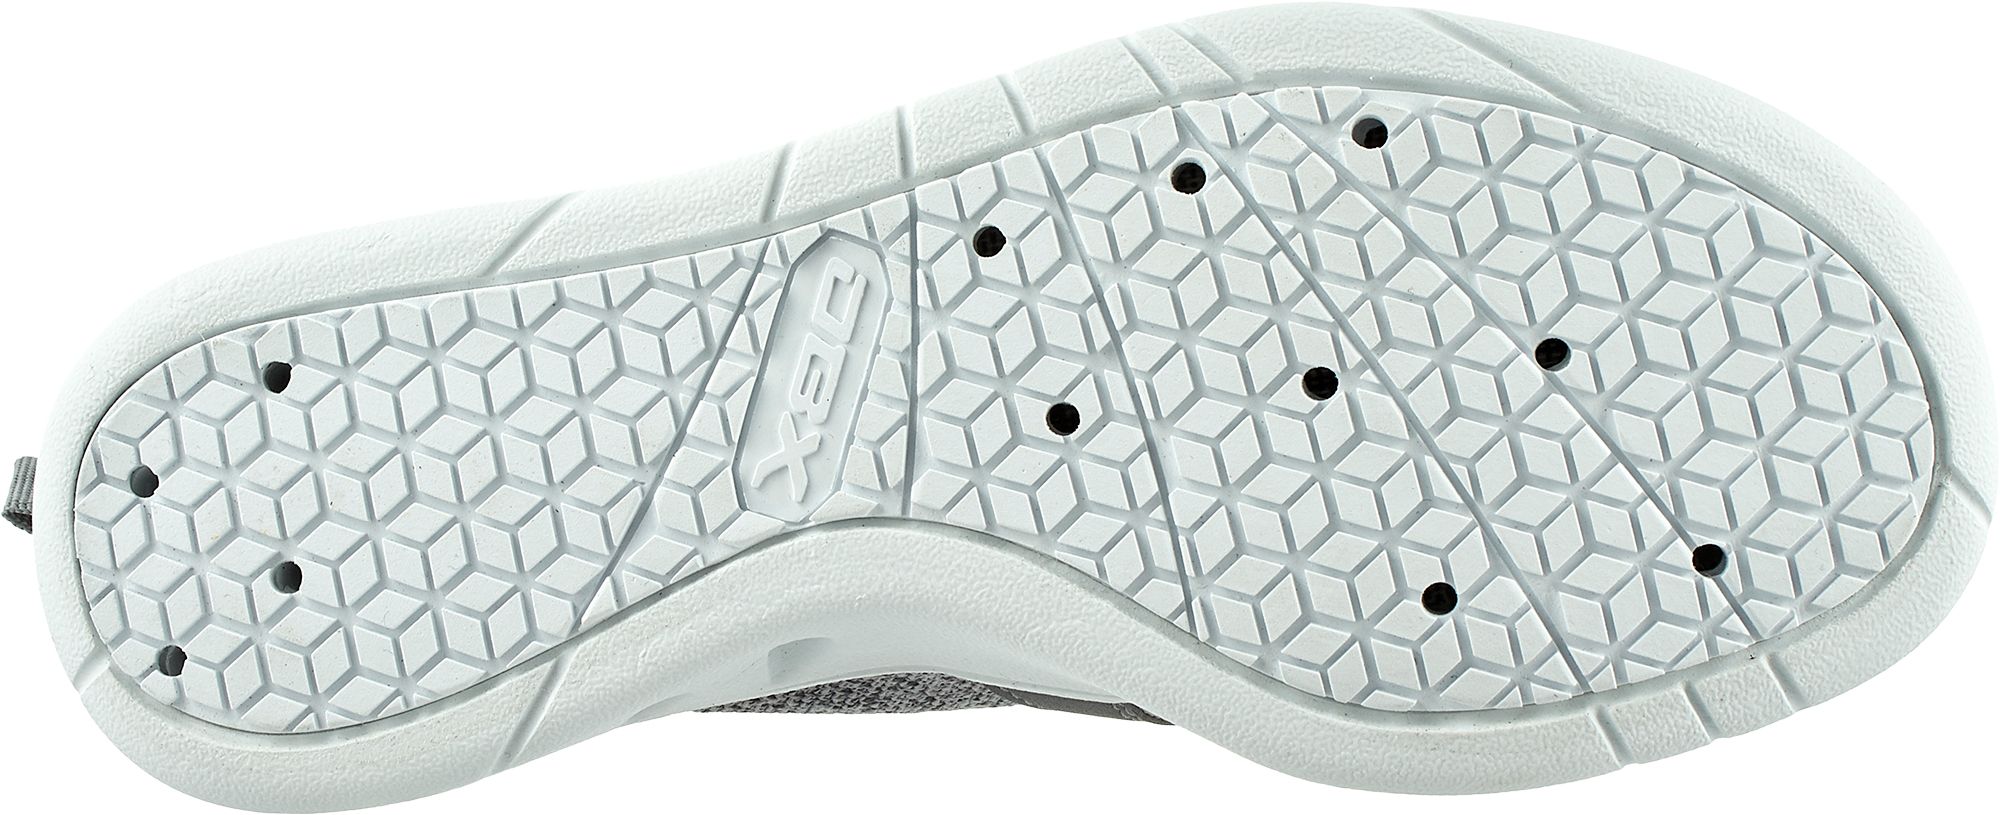 dbx water shoes amazon